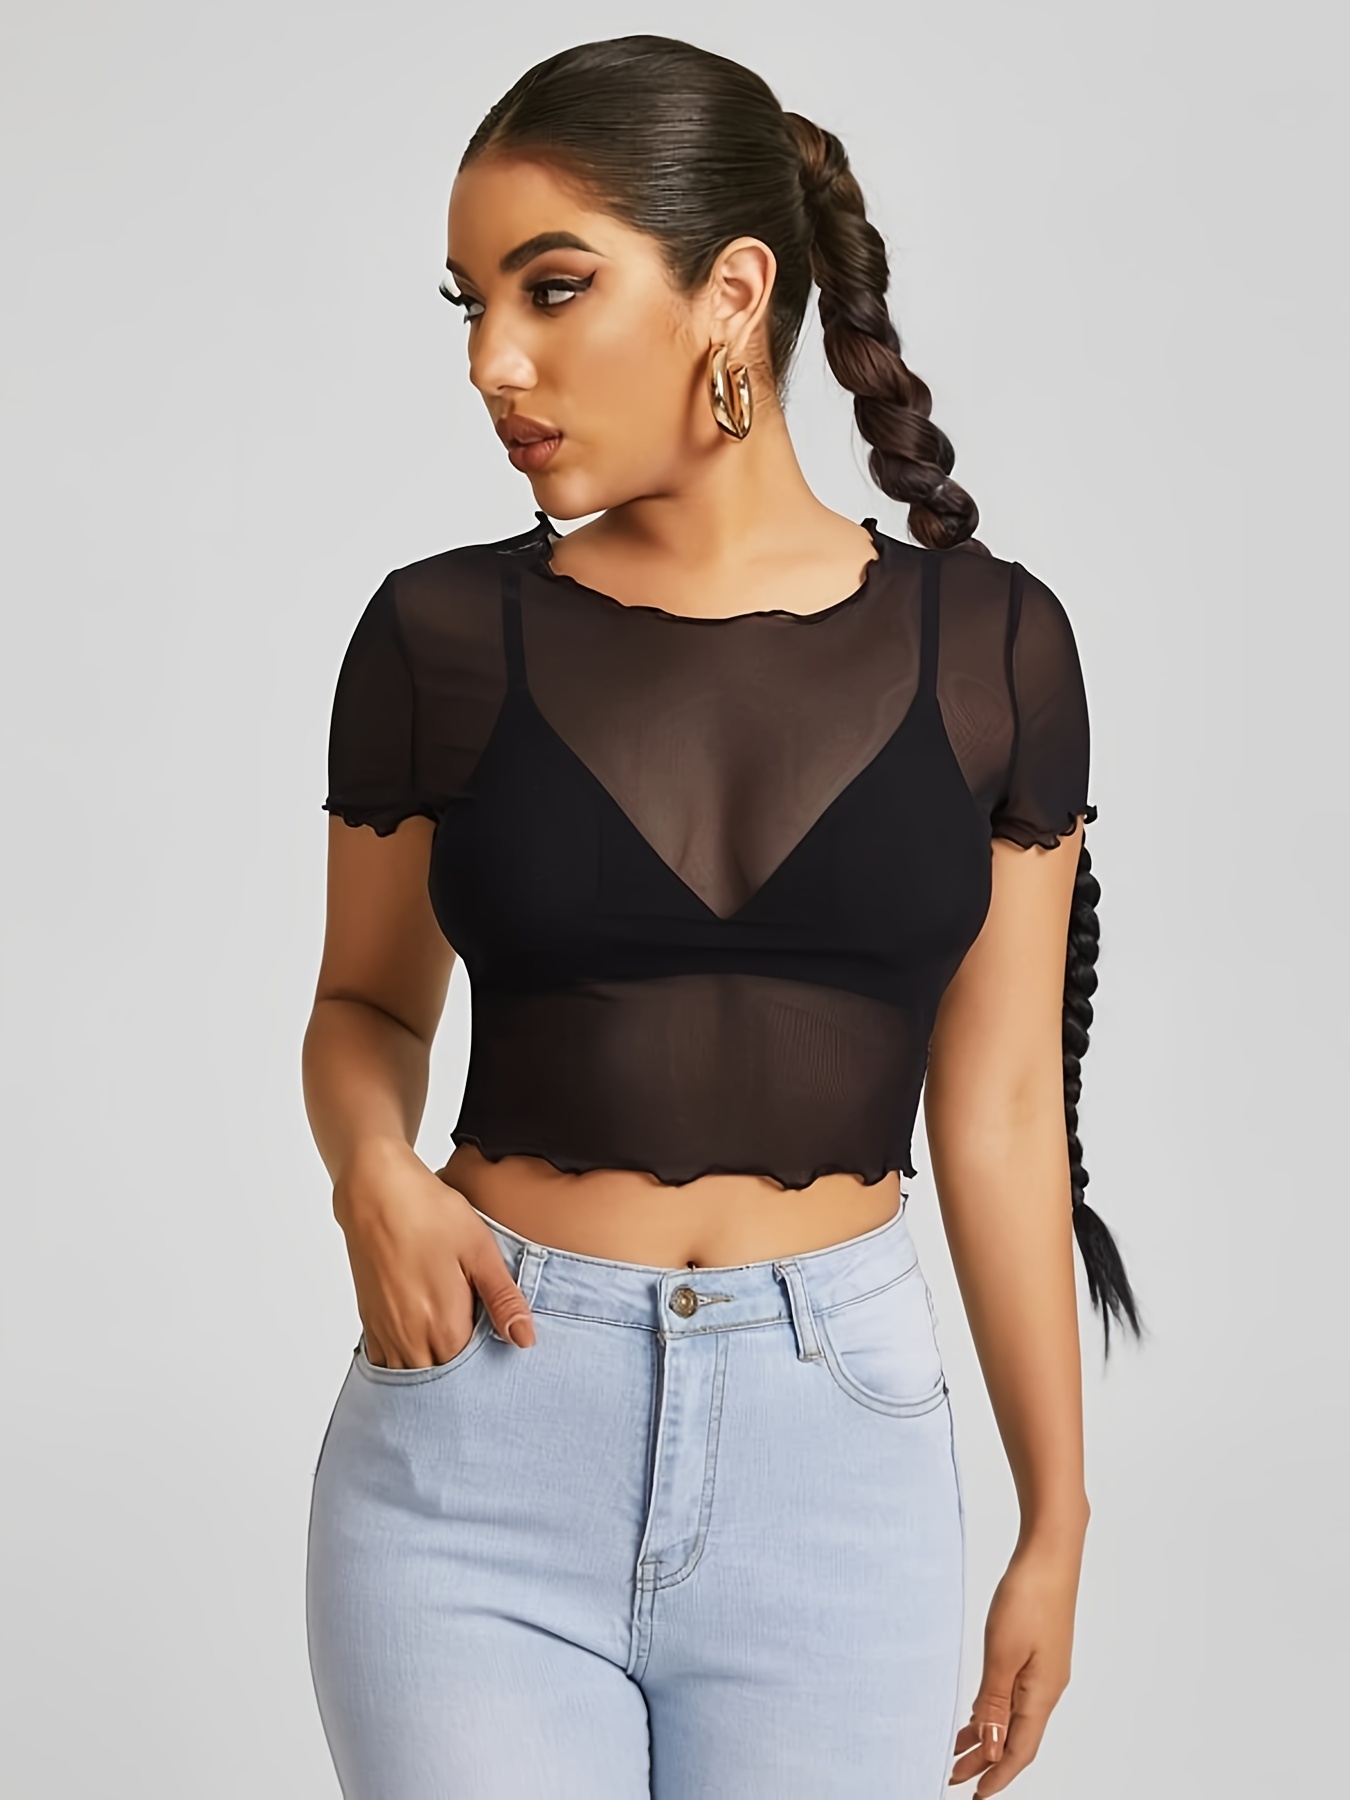 Floral Embroidered Mesh Crop Top, Sexy See Through Crew Neck Short Sleeve  Top, Women's Clothing